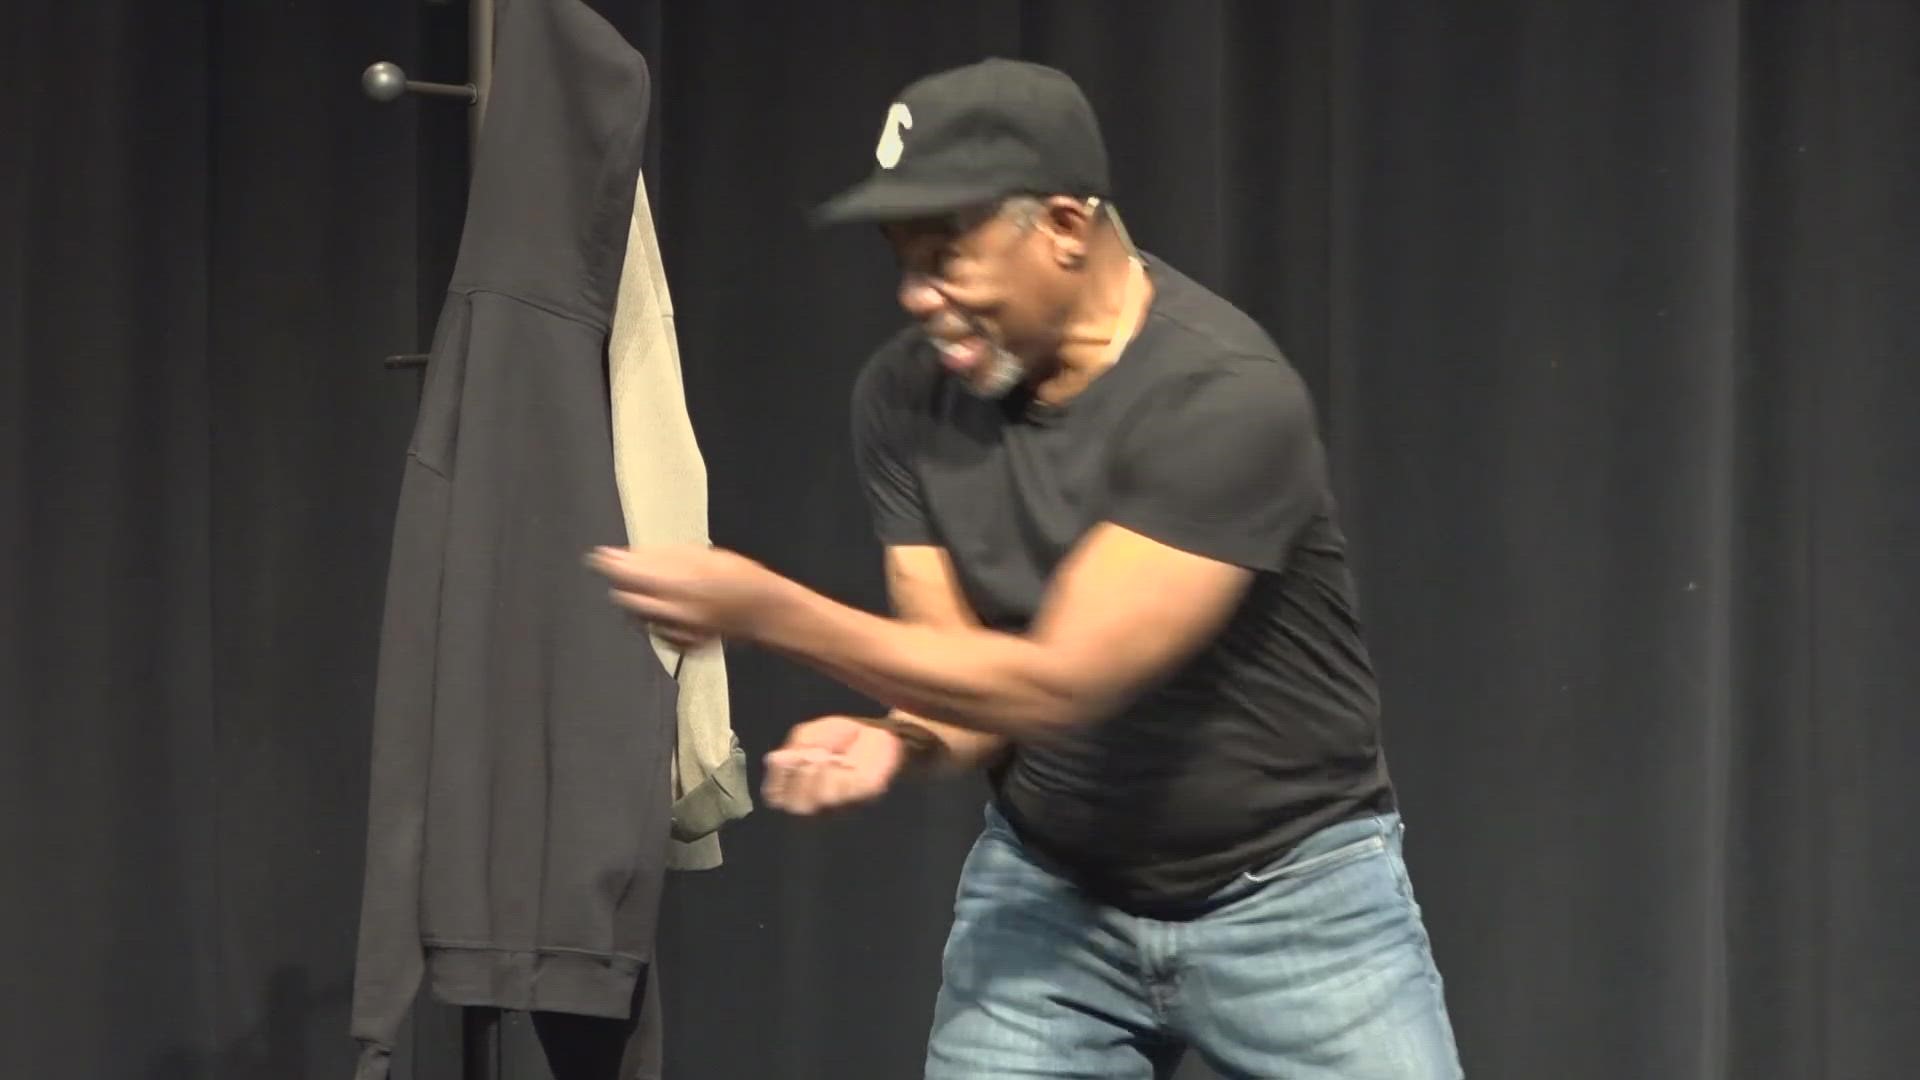 As part of the Black History Month series at Husson University, New York actor LeLand Gantt performed his one-man show, "Rhapsody in Black."